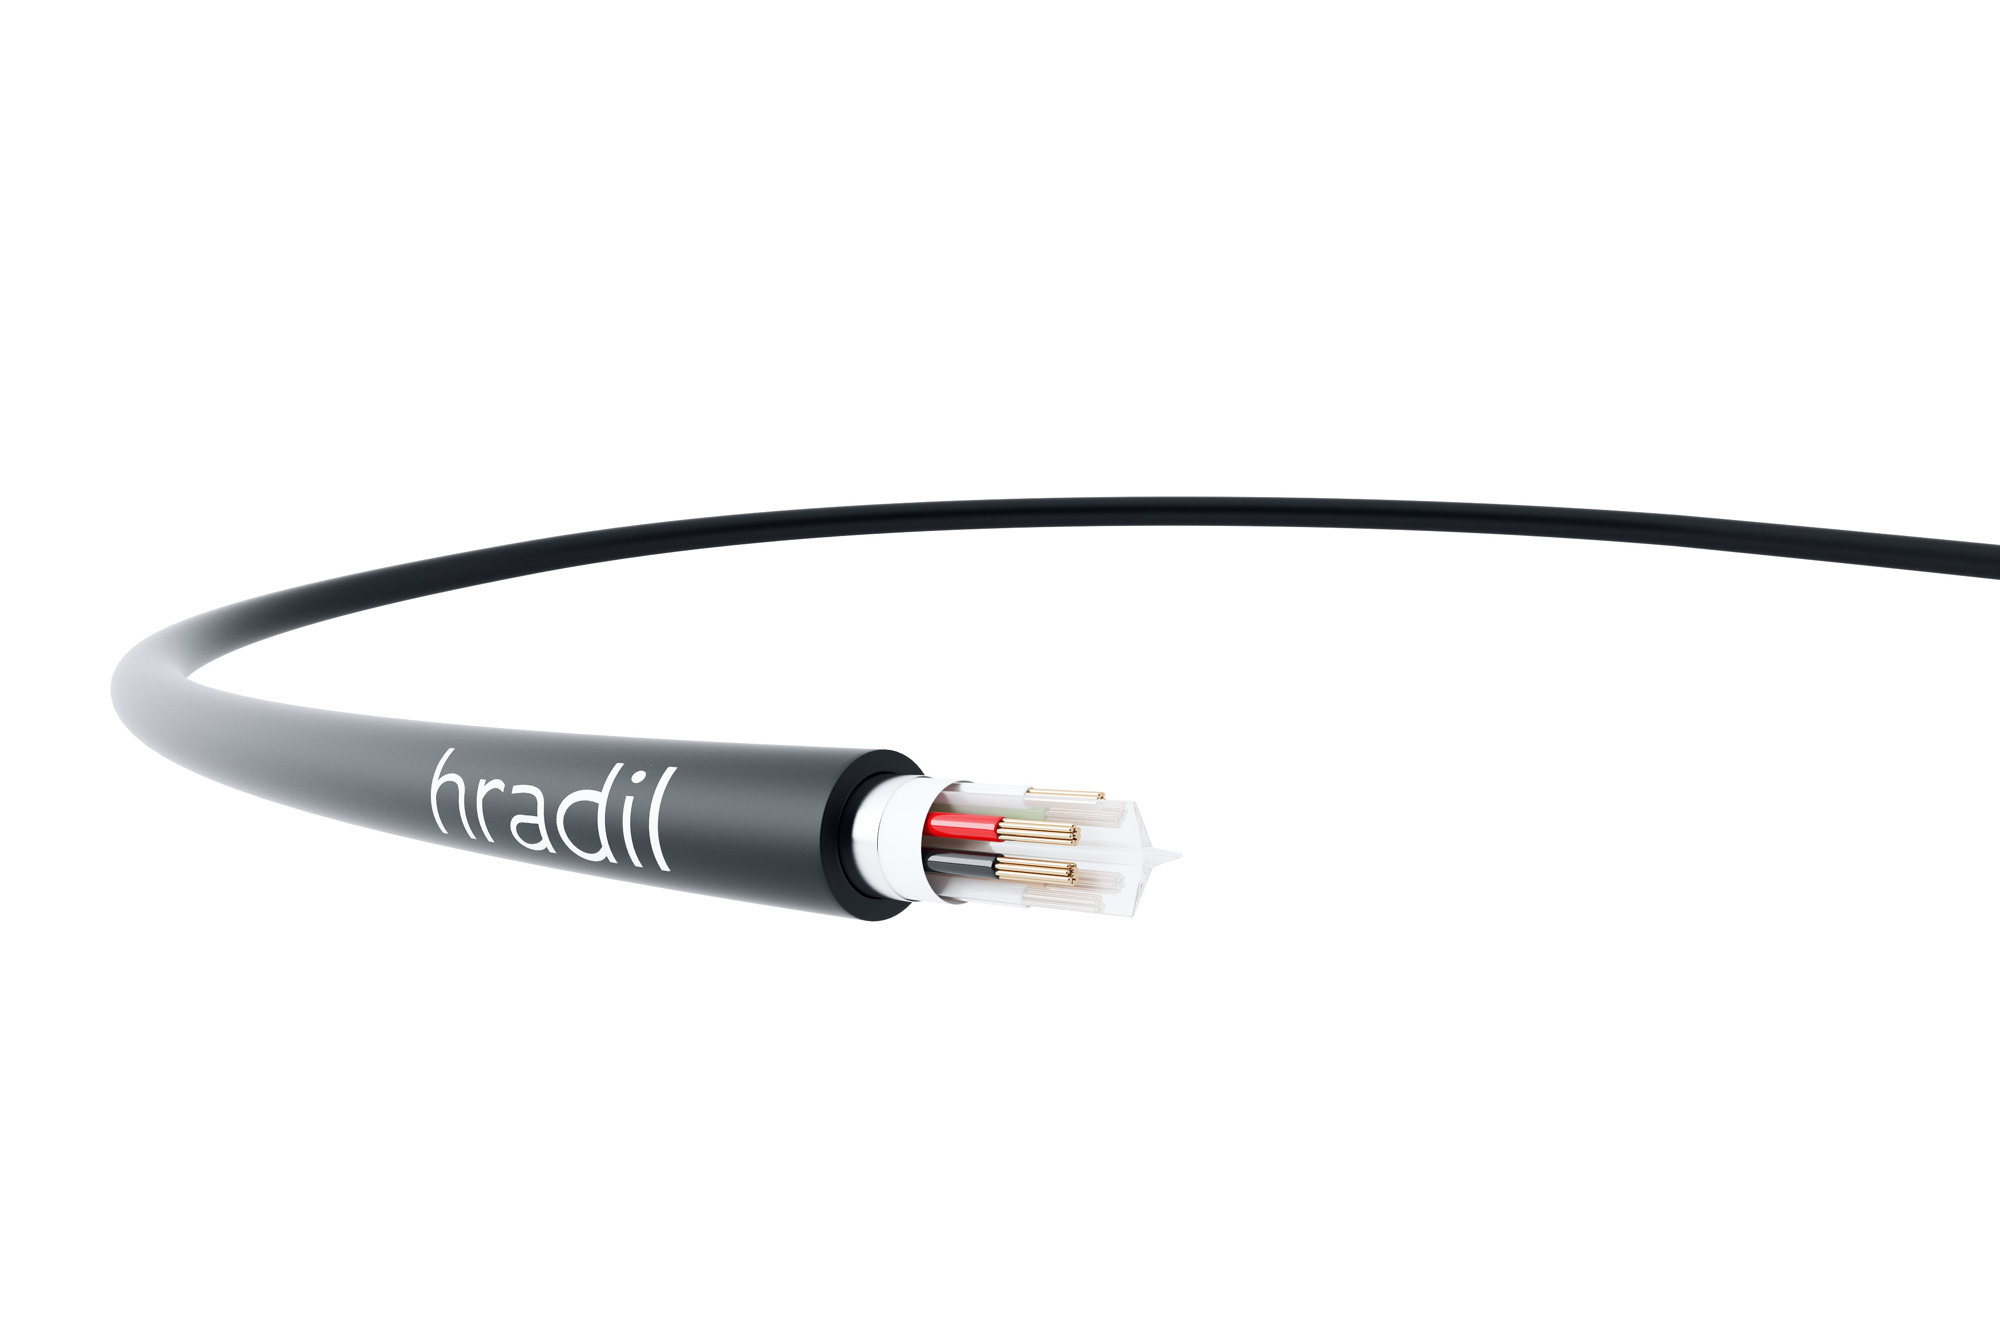 HRADIL High-performance hybrid cable for Ethernet and power transmission